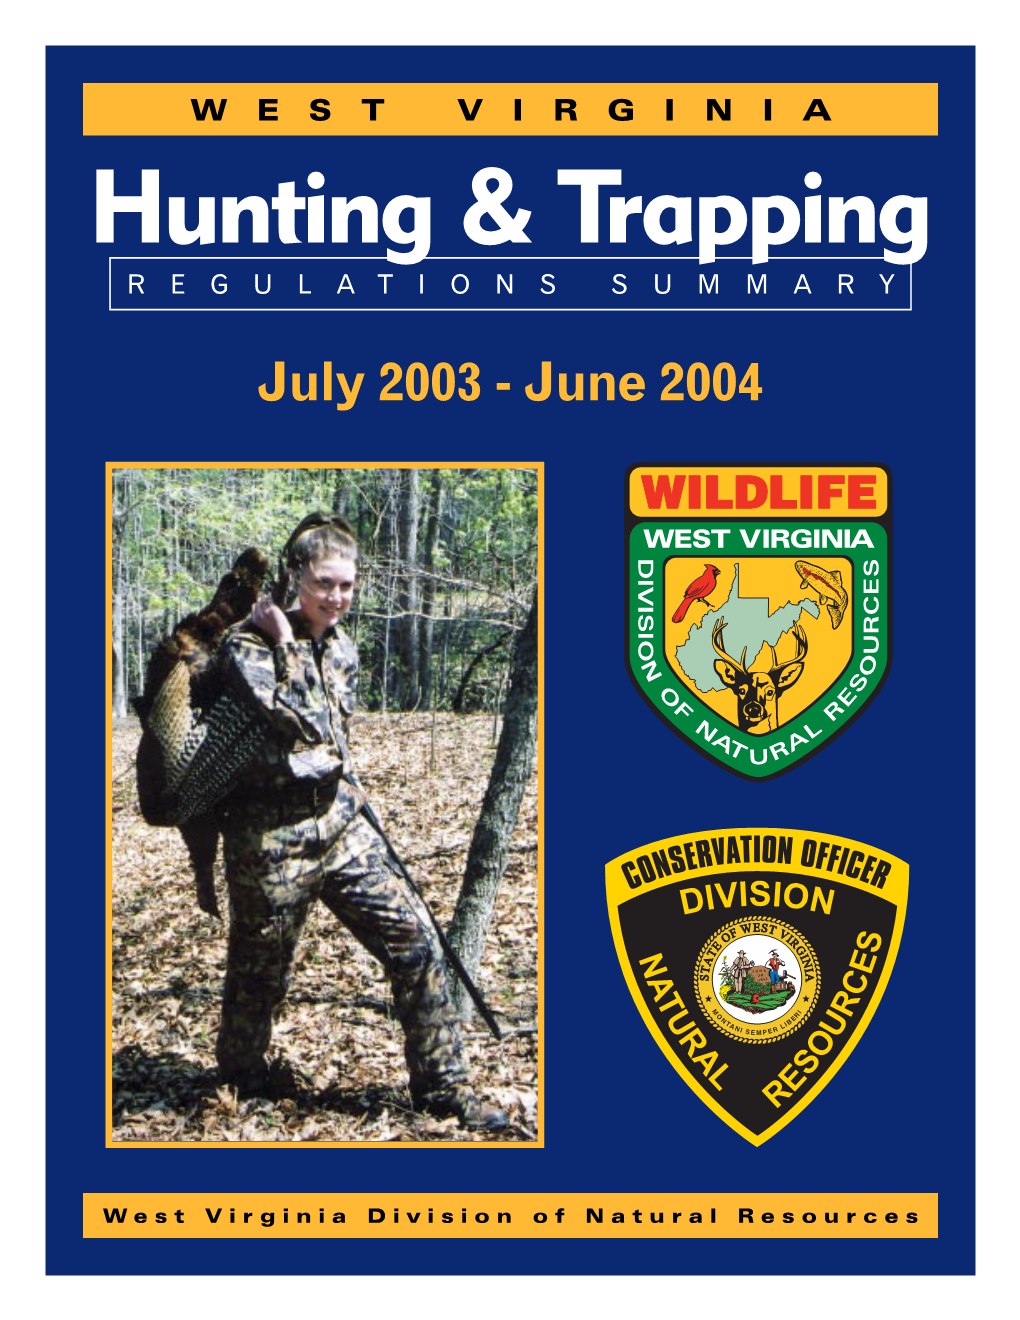 Hunting & Trapping